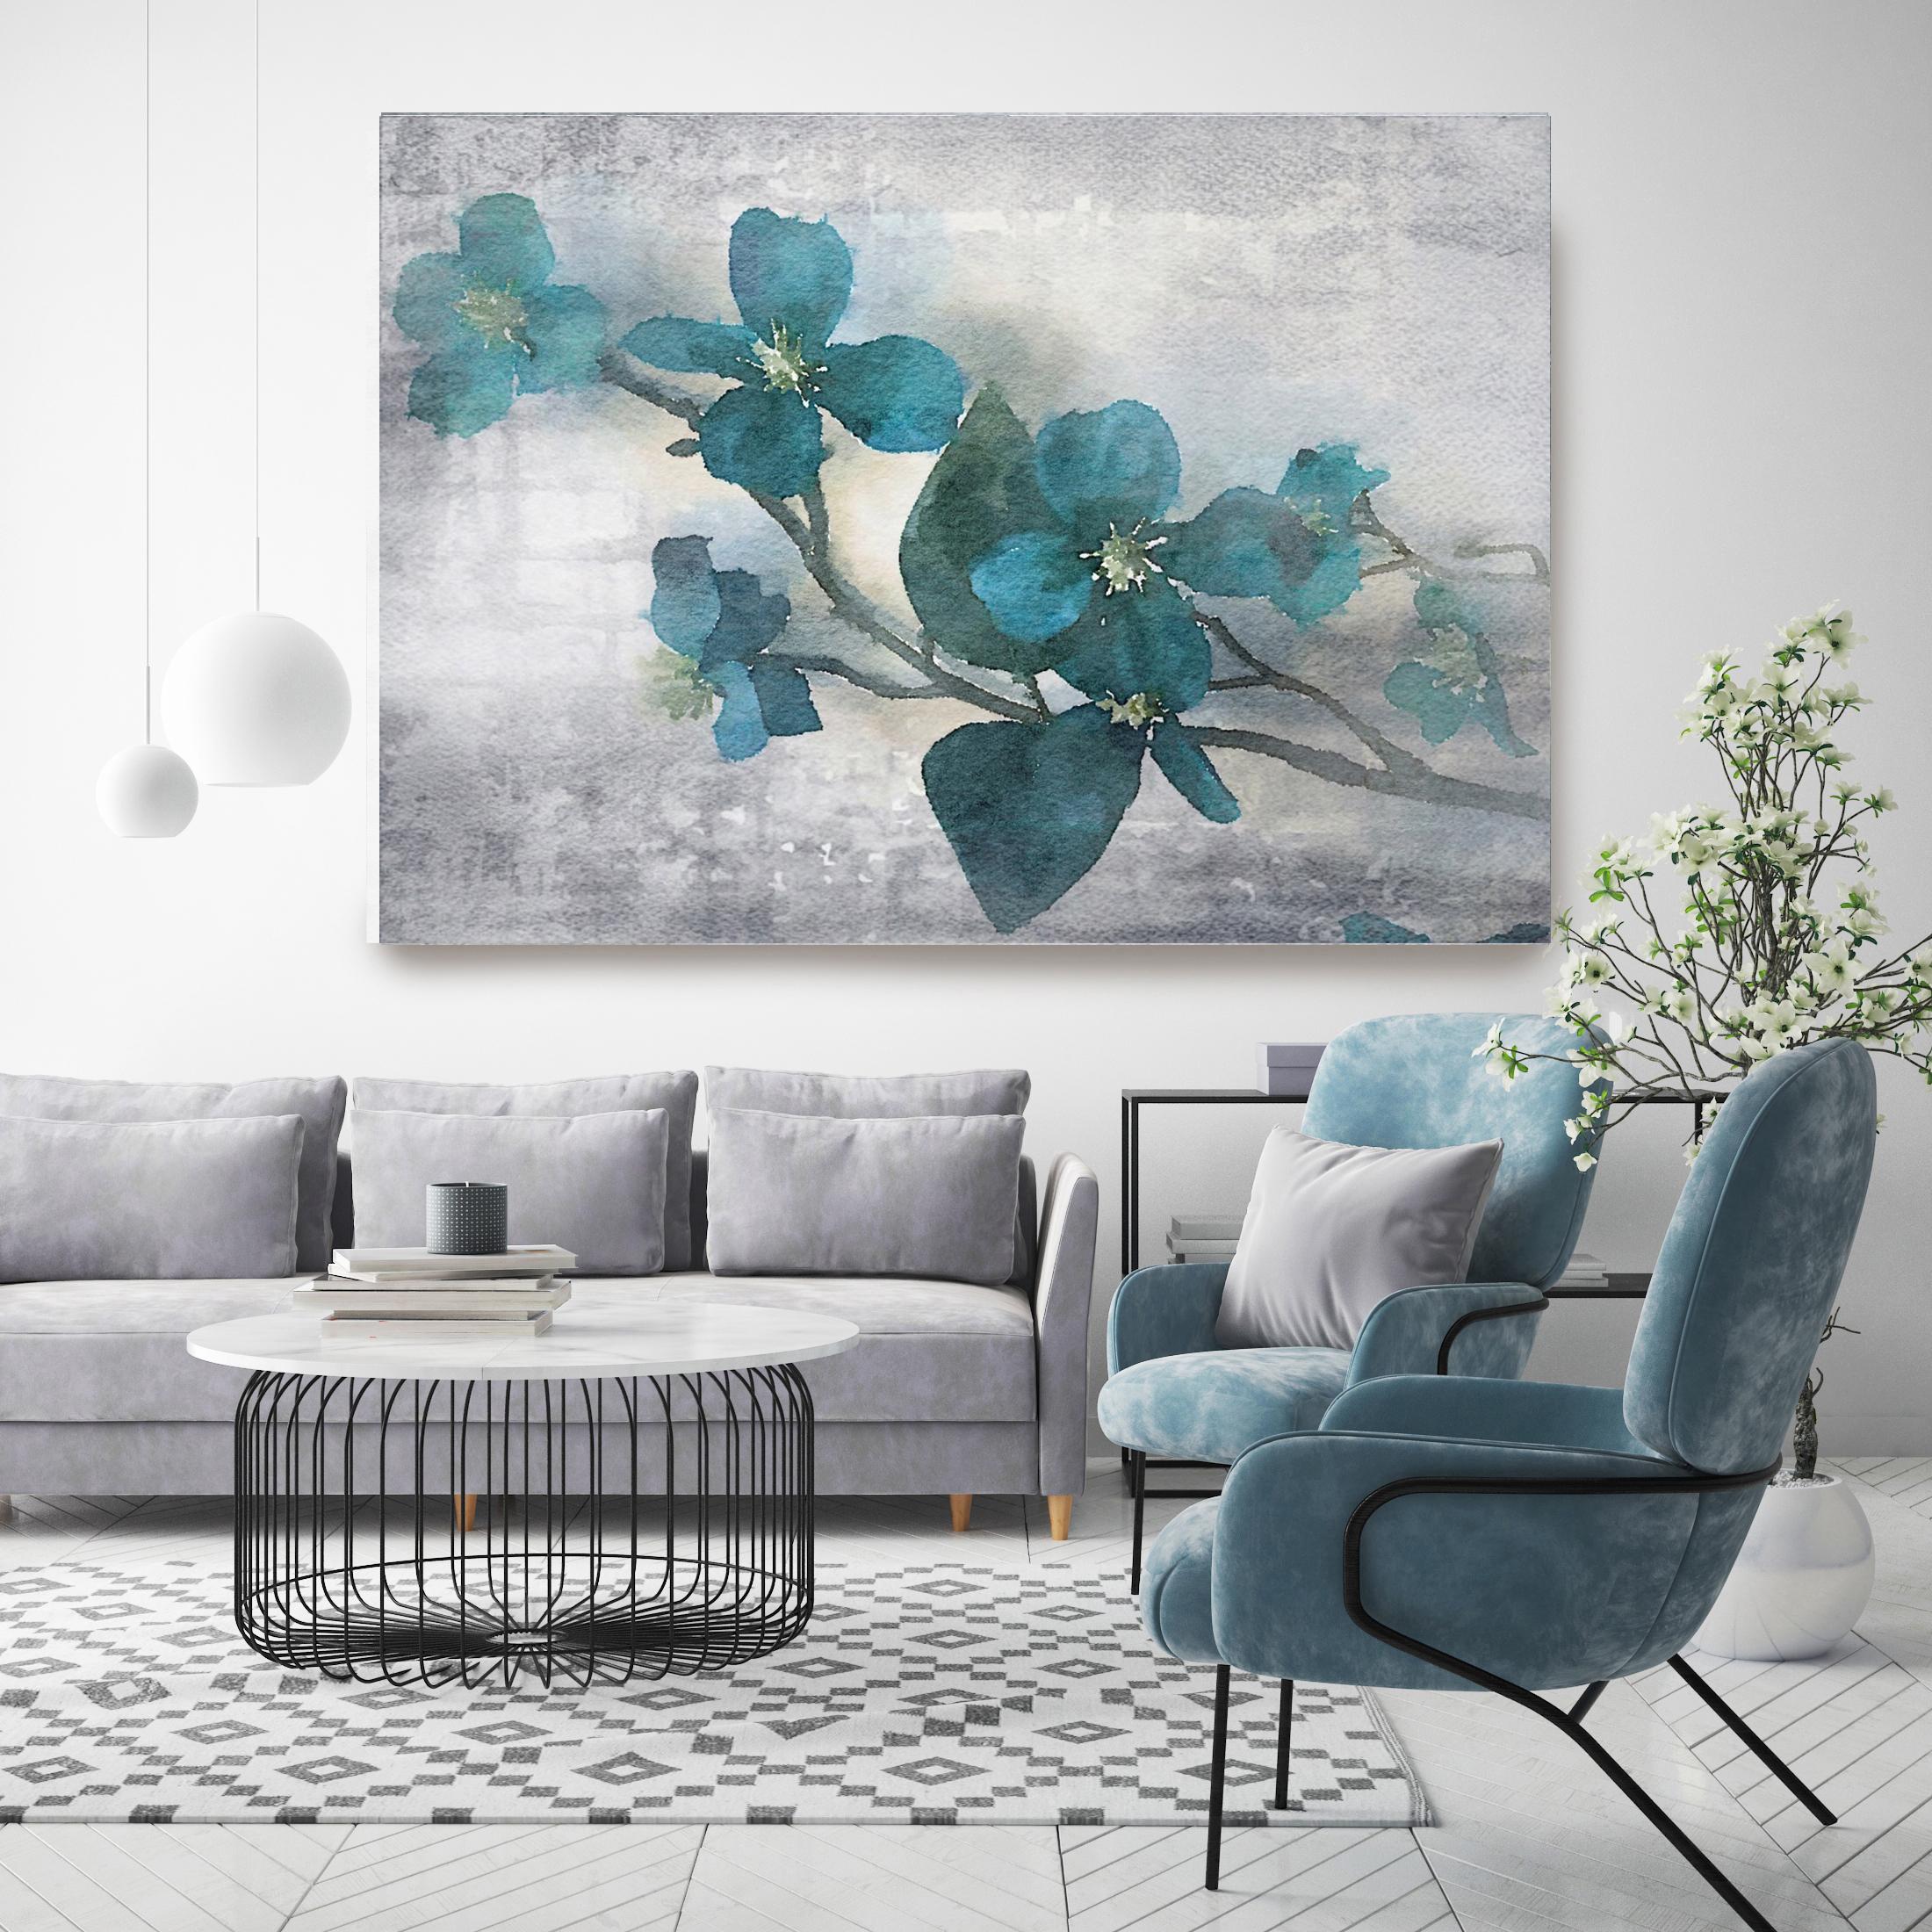 Teal Rustic Flowers Art Embellished Giclee on Canvas 40X60 In Love With Spring  - Painting by Irena Orlov